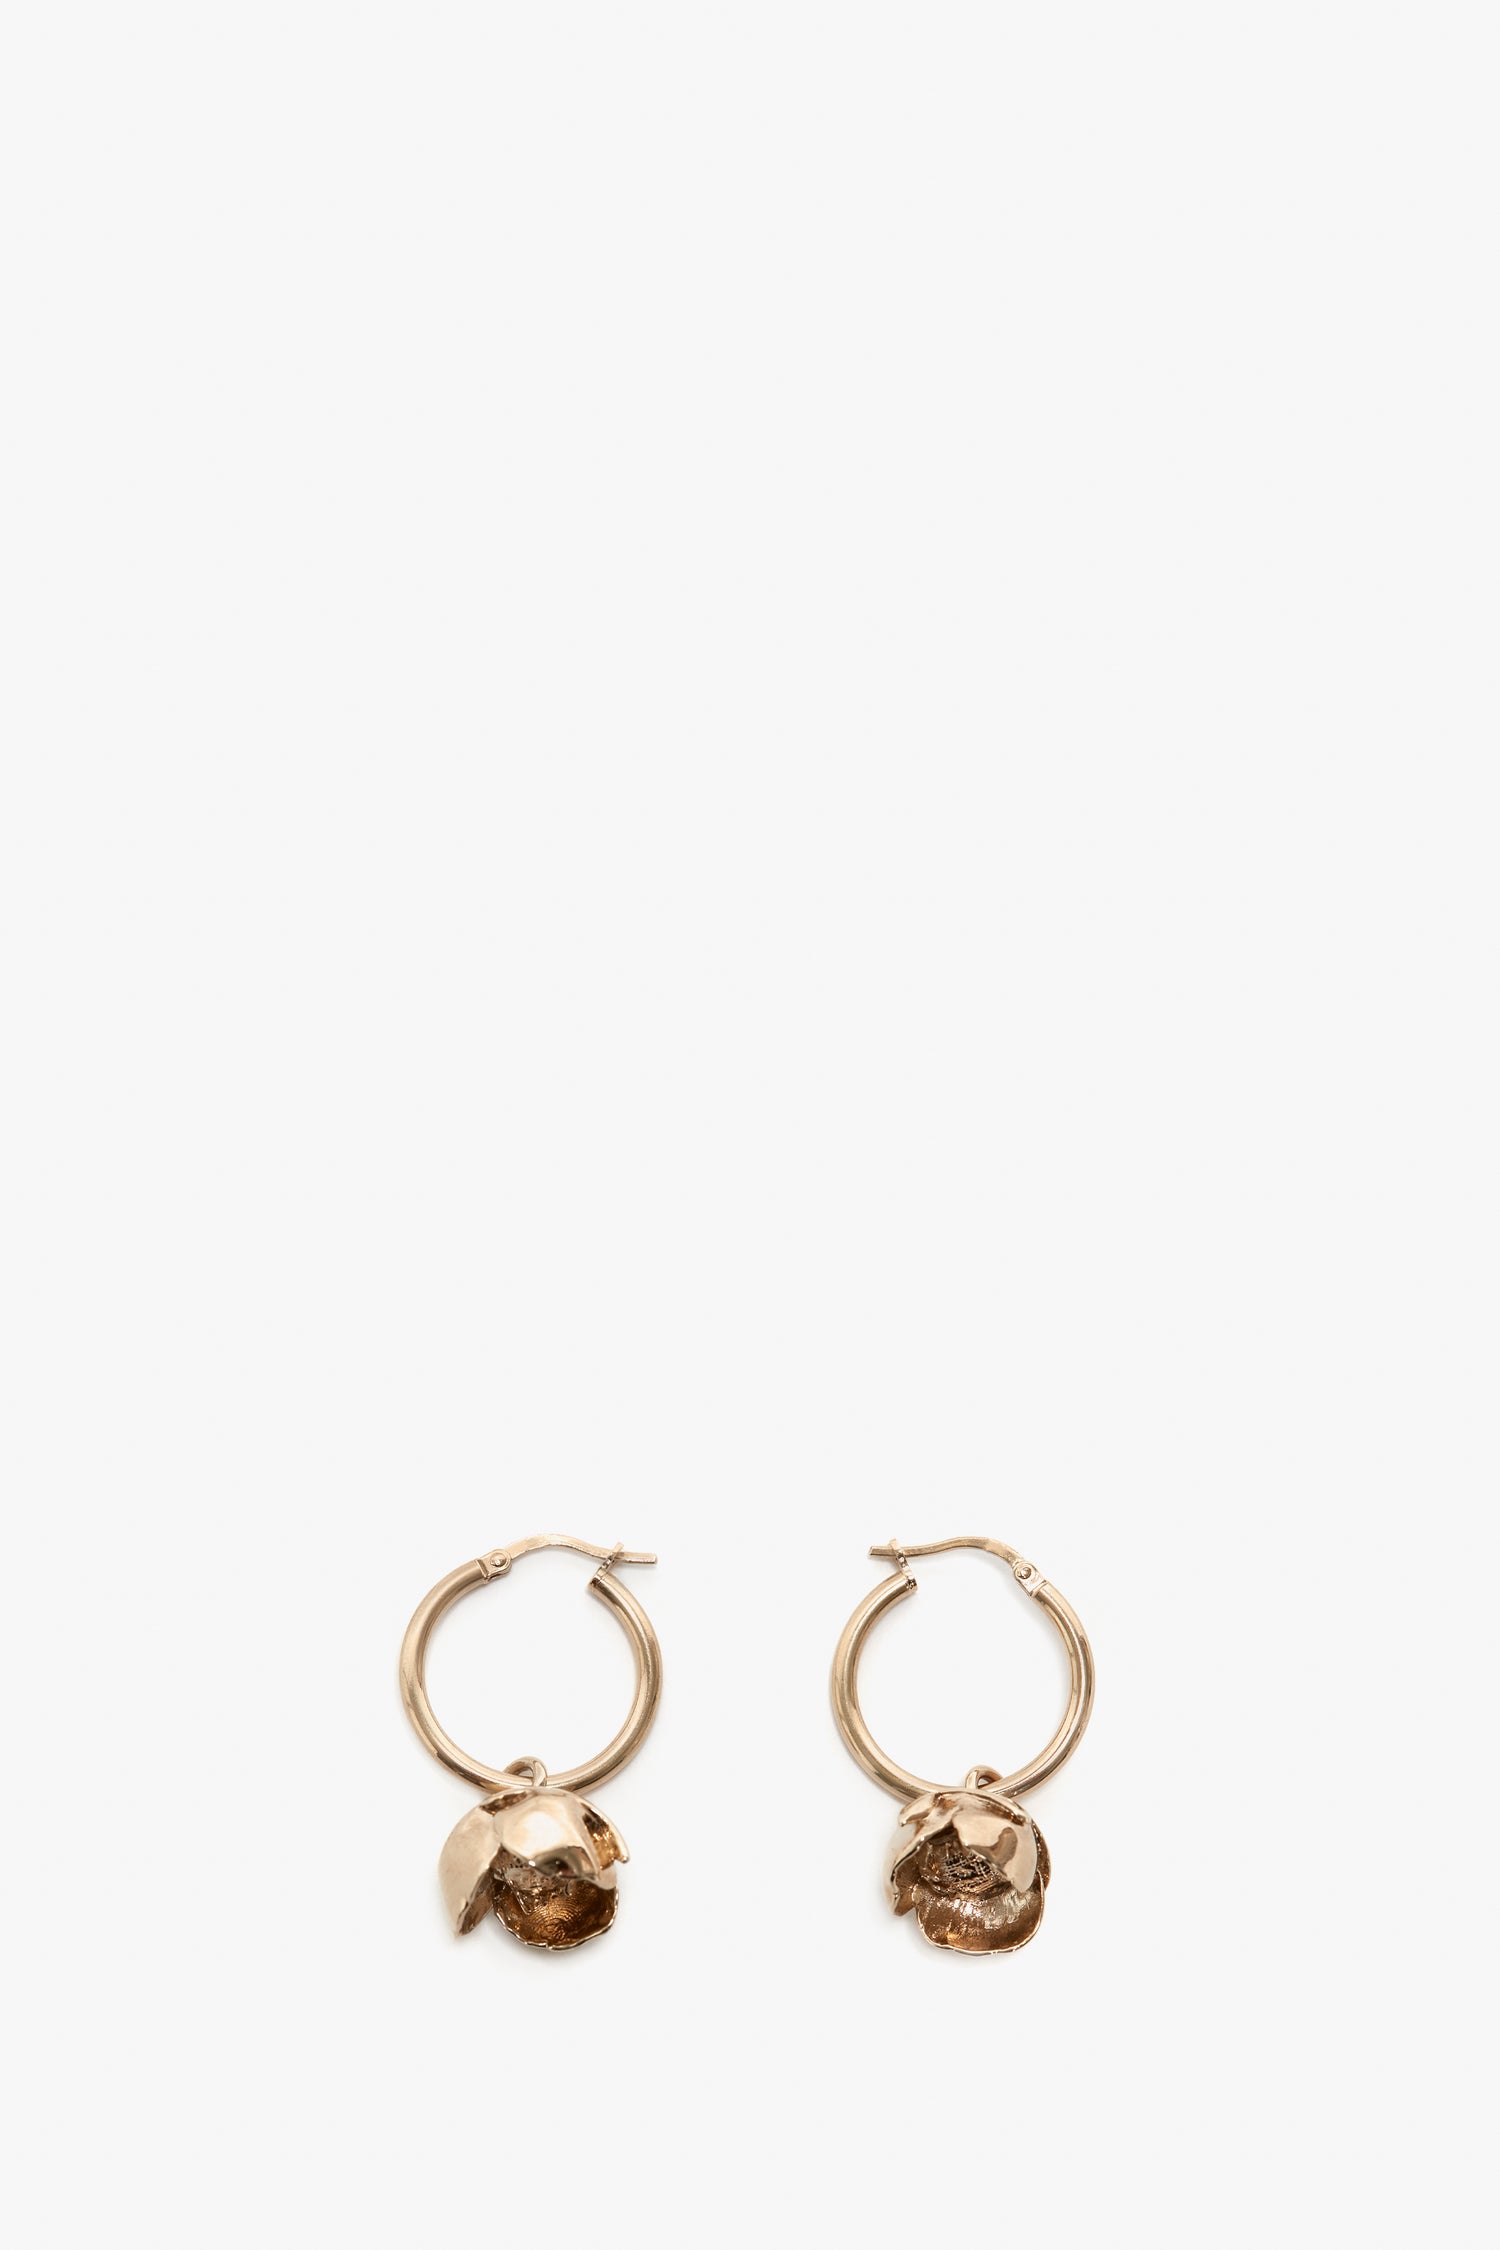 A pair of Exclusive Camellia Flower Hoop Earrings In Gold by Victoria Beckham with small, textured pendants, isolated on a white background.